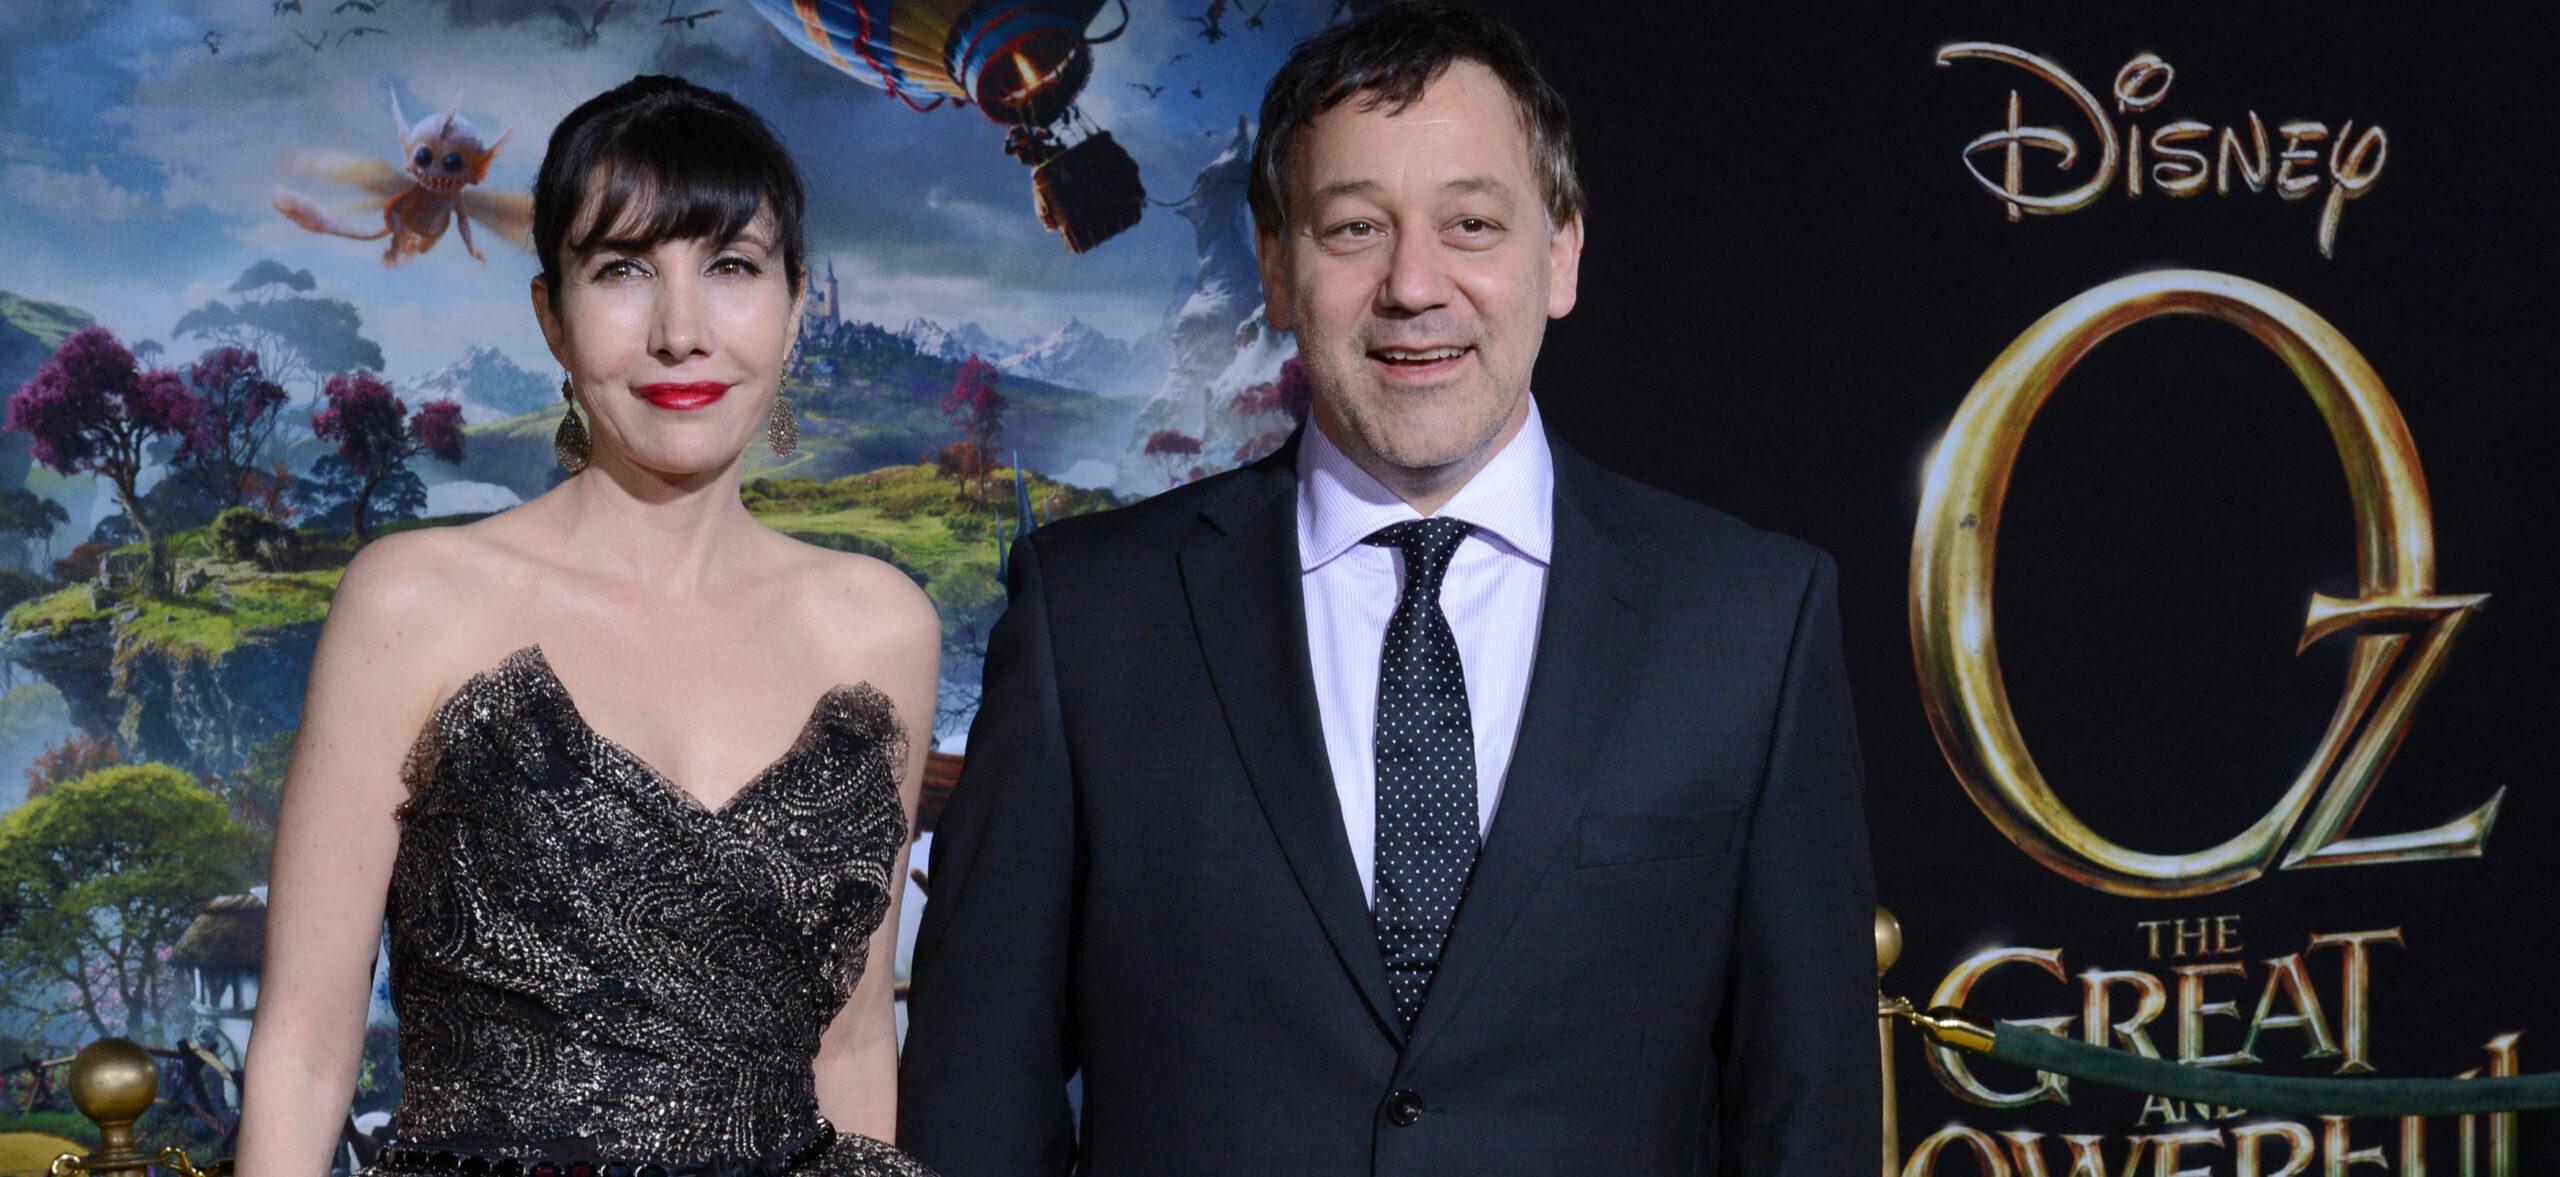 Sam Raimi’s Wife, Gillian Greene, Files For Divorce After 30 Years And Demands Spousal Support